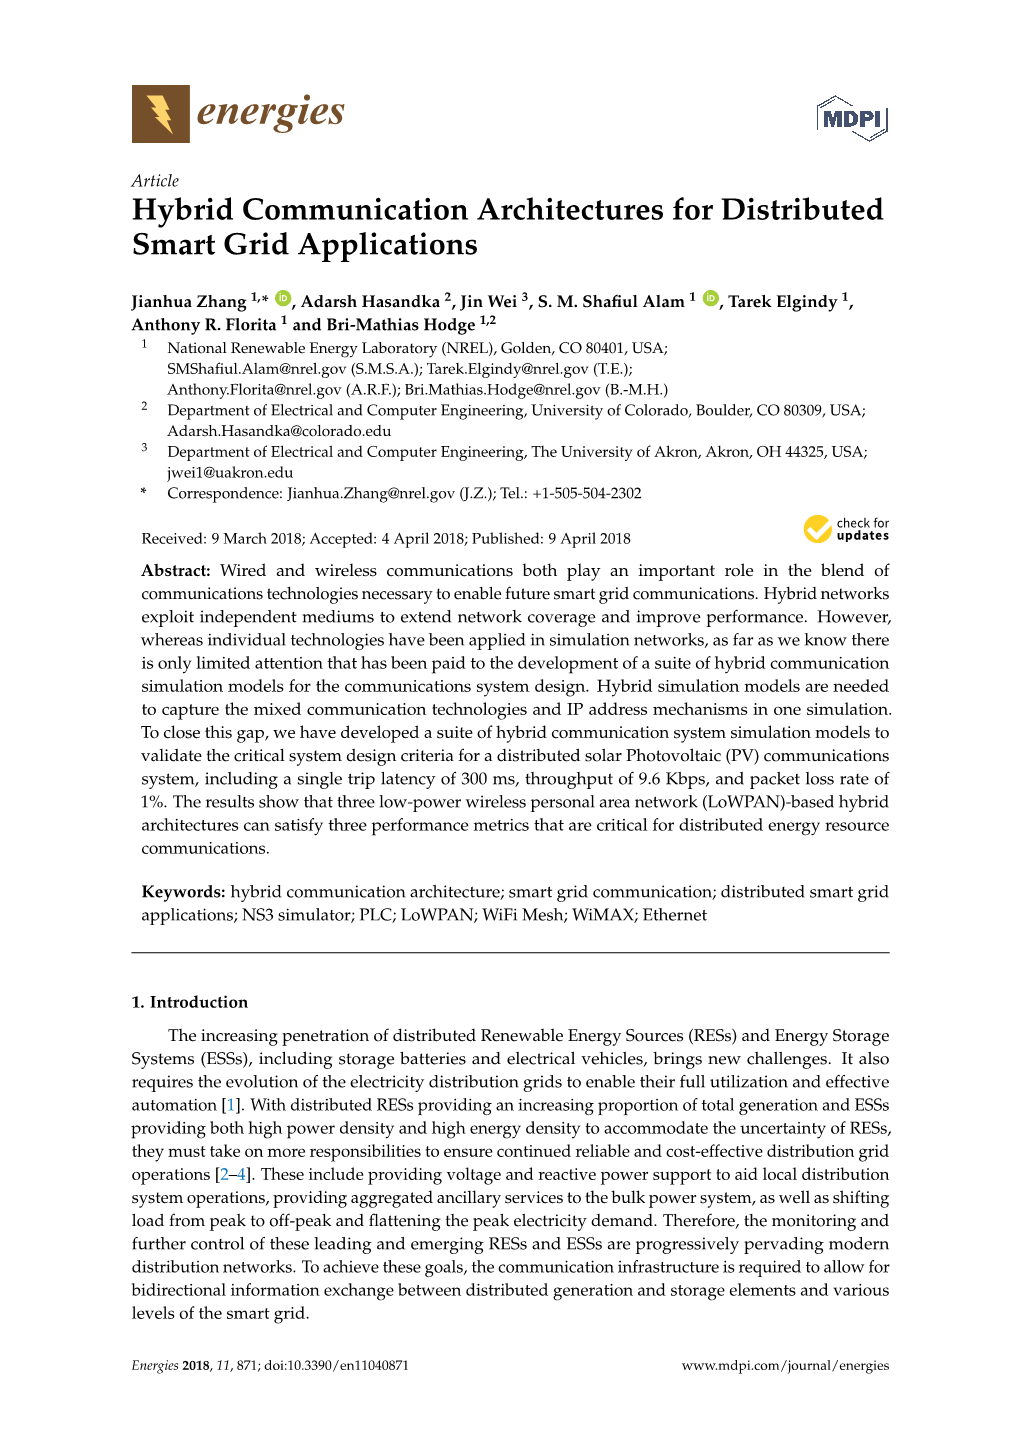 Hybrid Communication Architectures for Distributed Smart Grid Applications